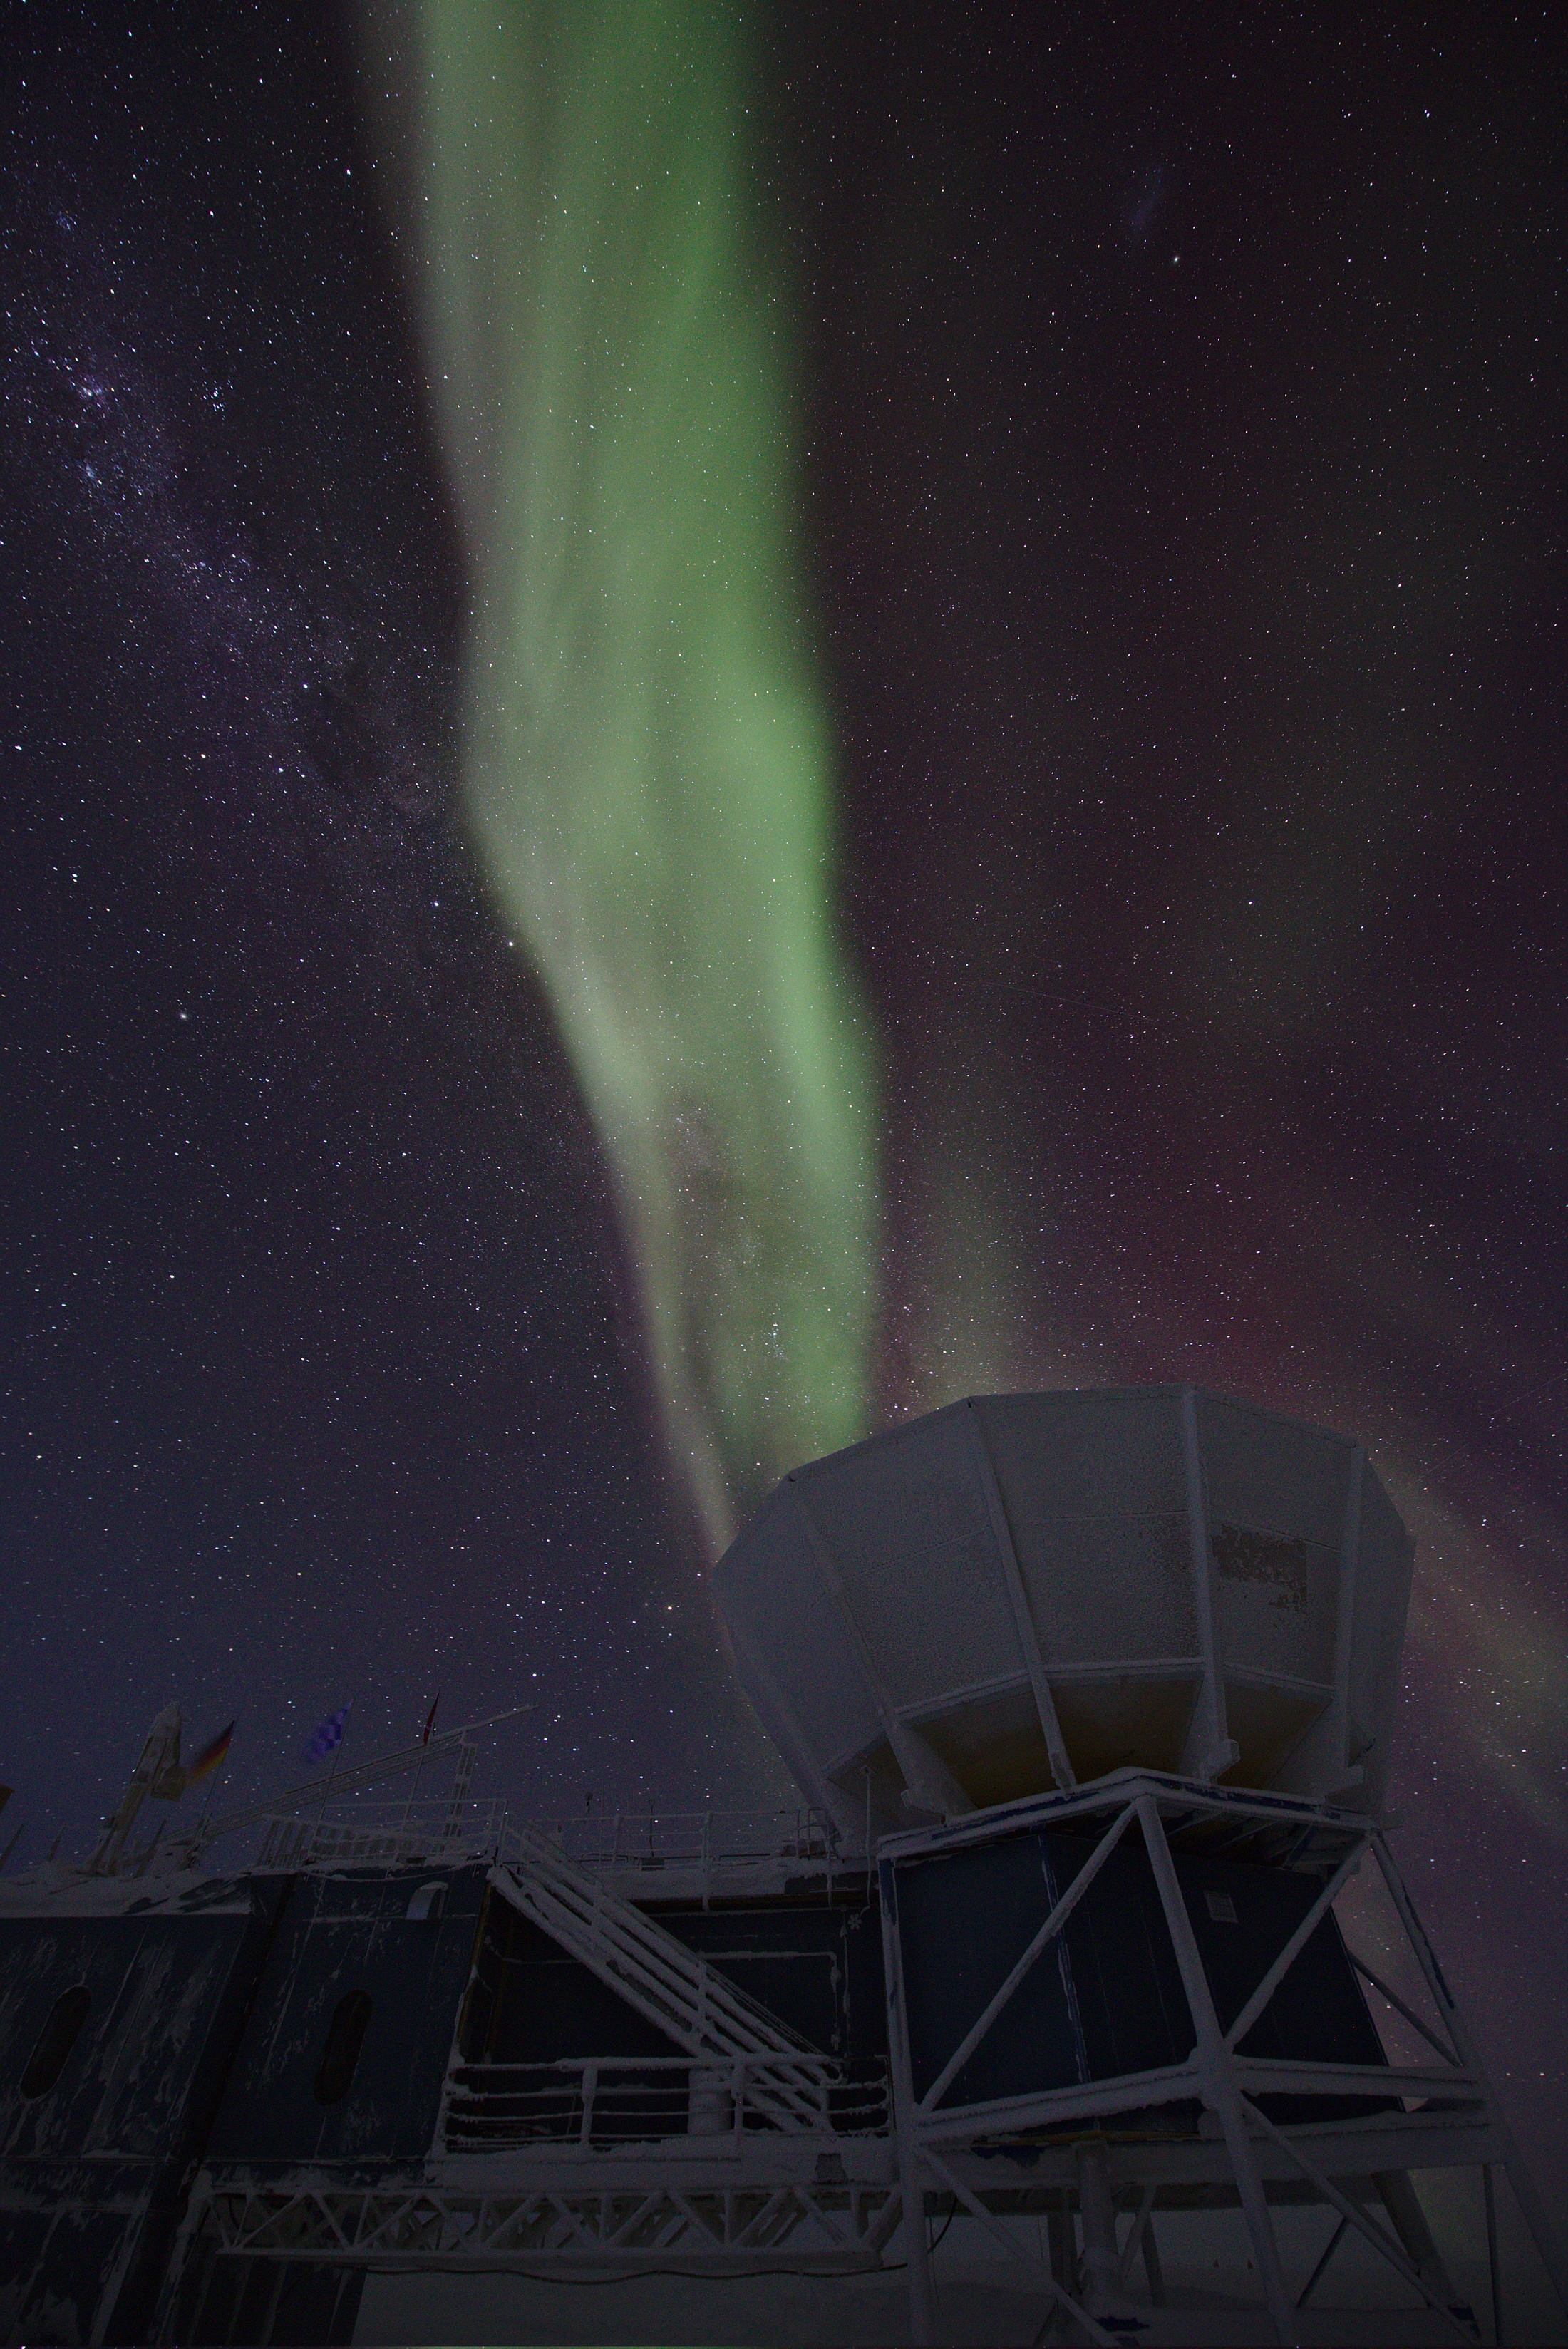 The SPUD telescope ground shield with strong auroras above it